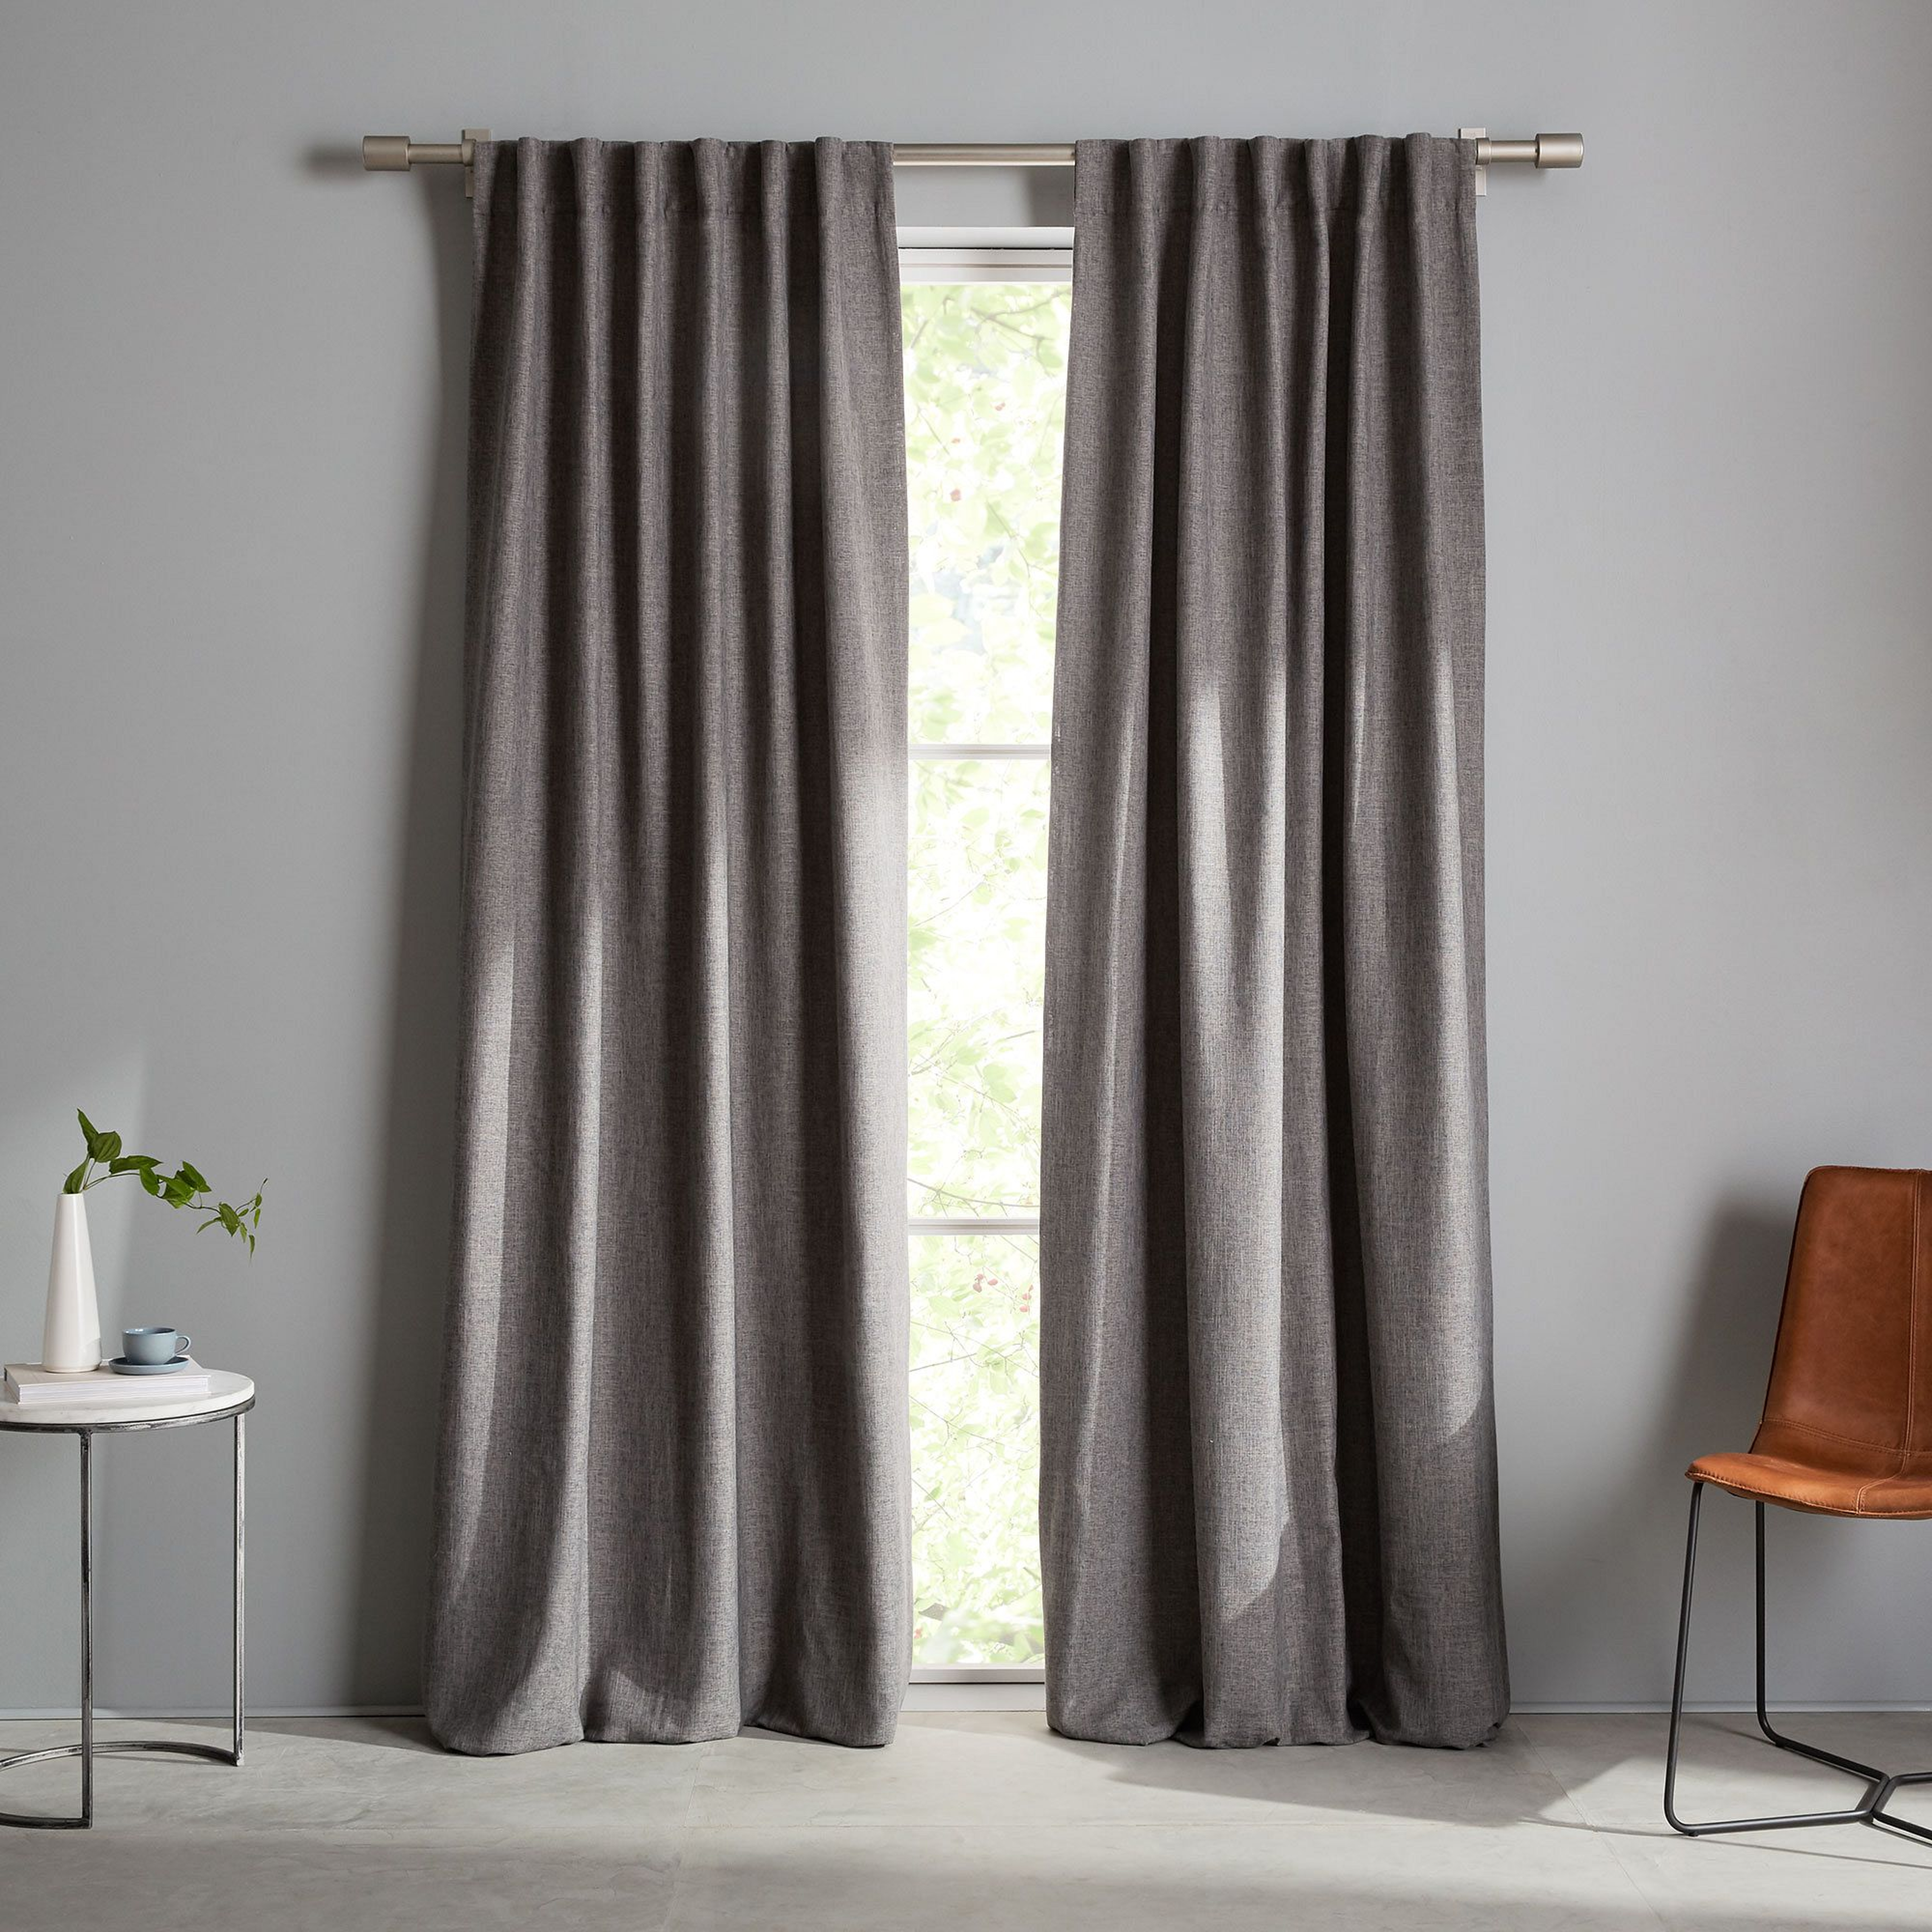 Crossweave Curtain with Blackout Lining, Charcoal, 48"X84" - West Elm